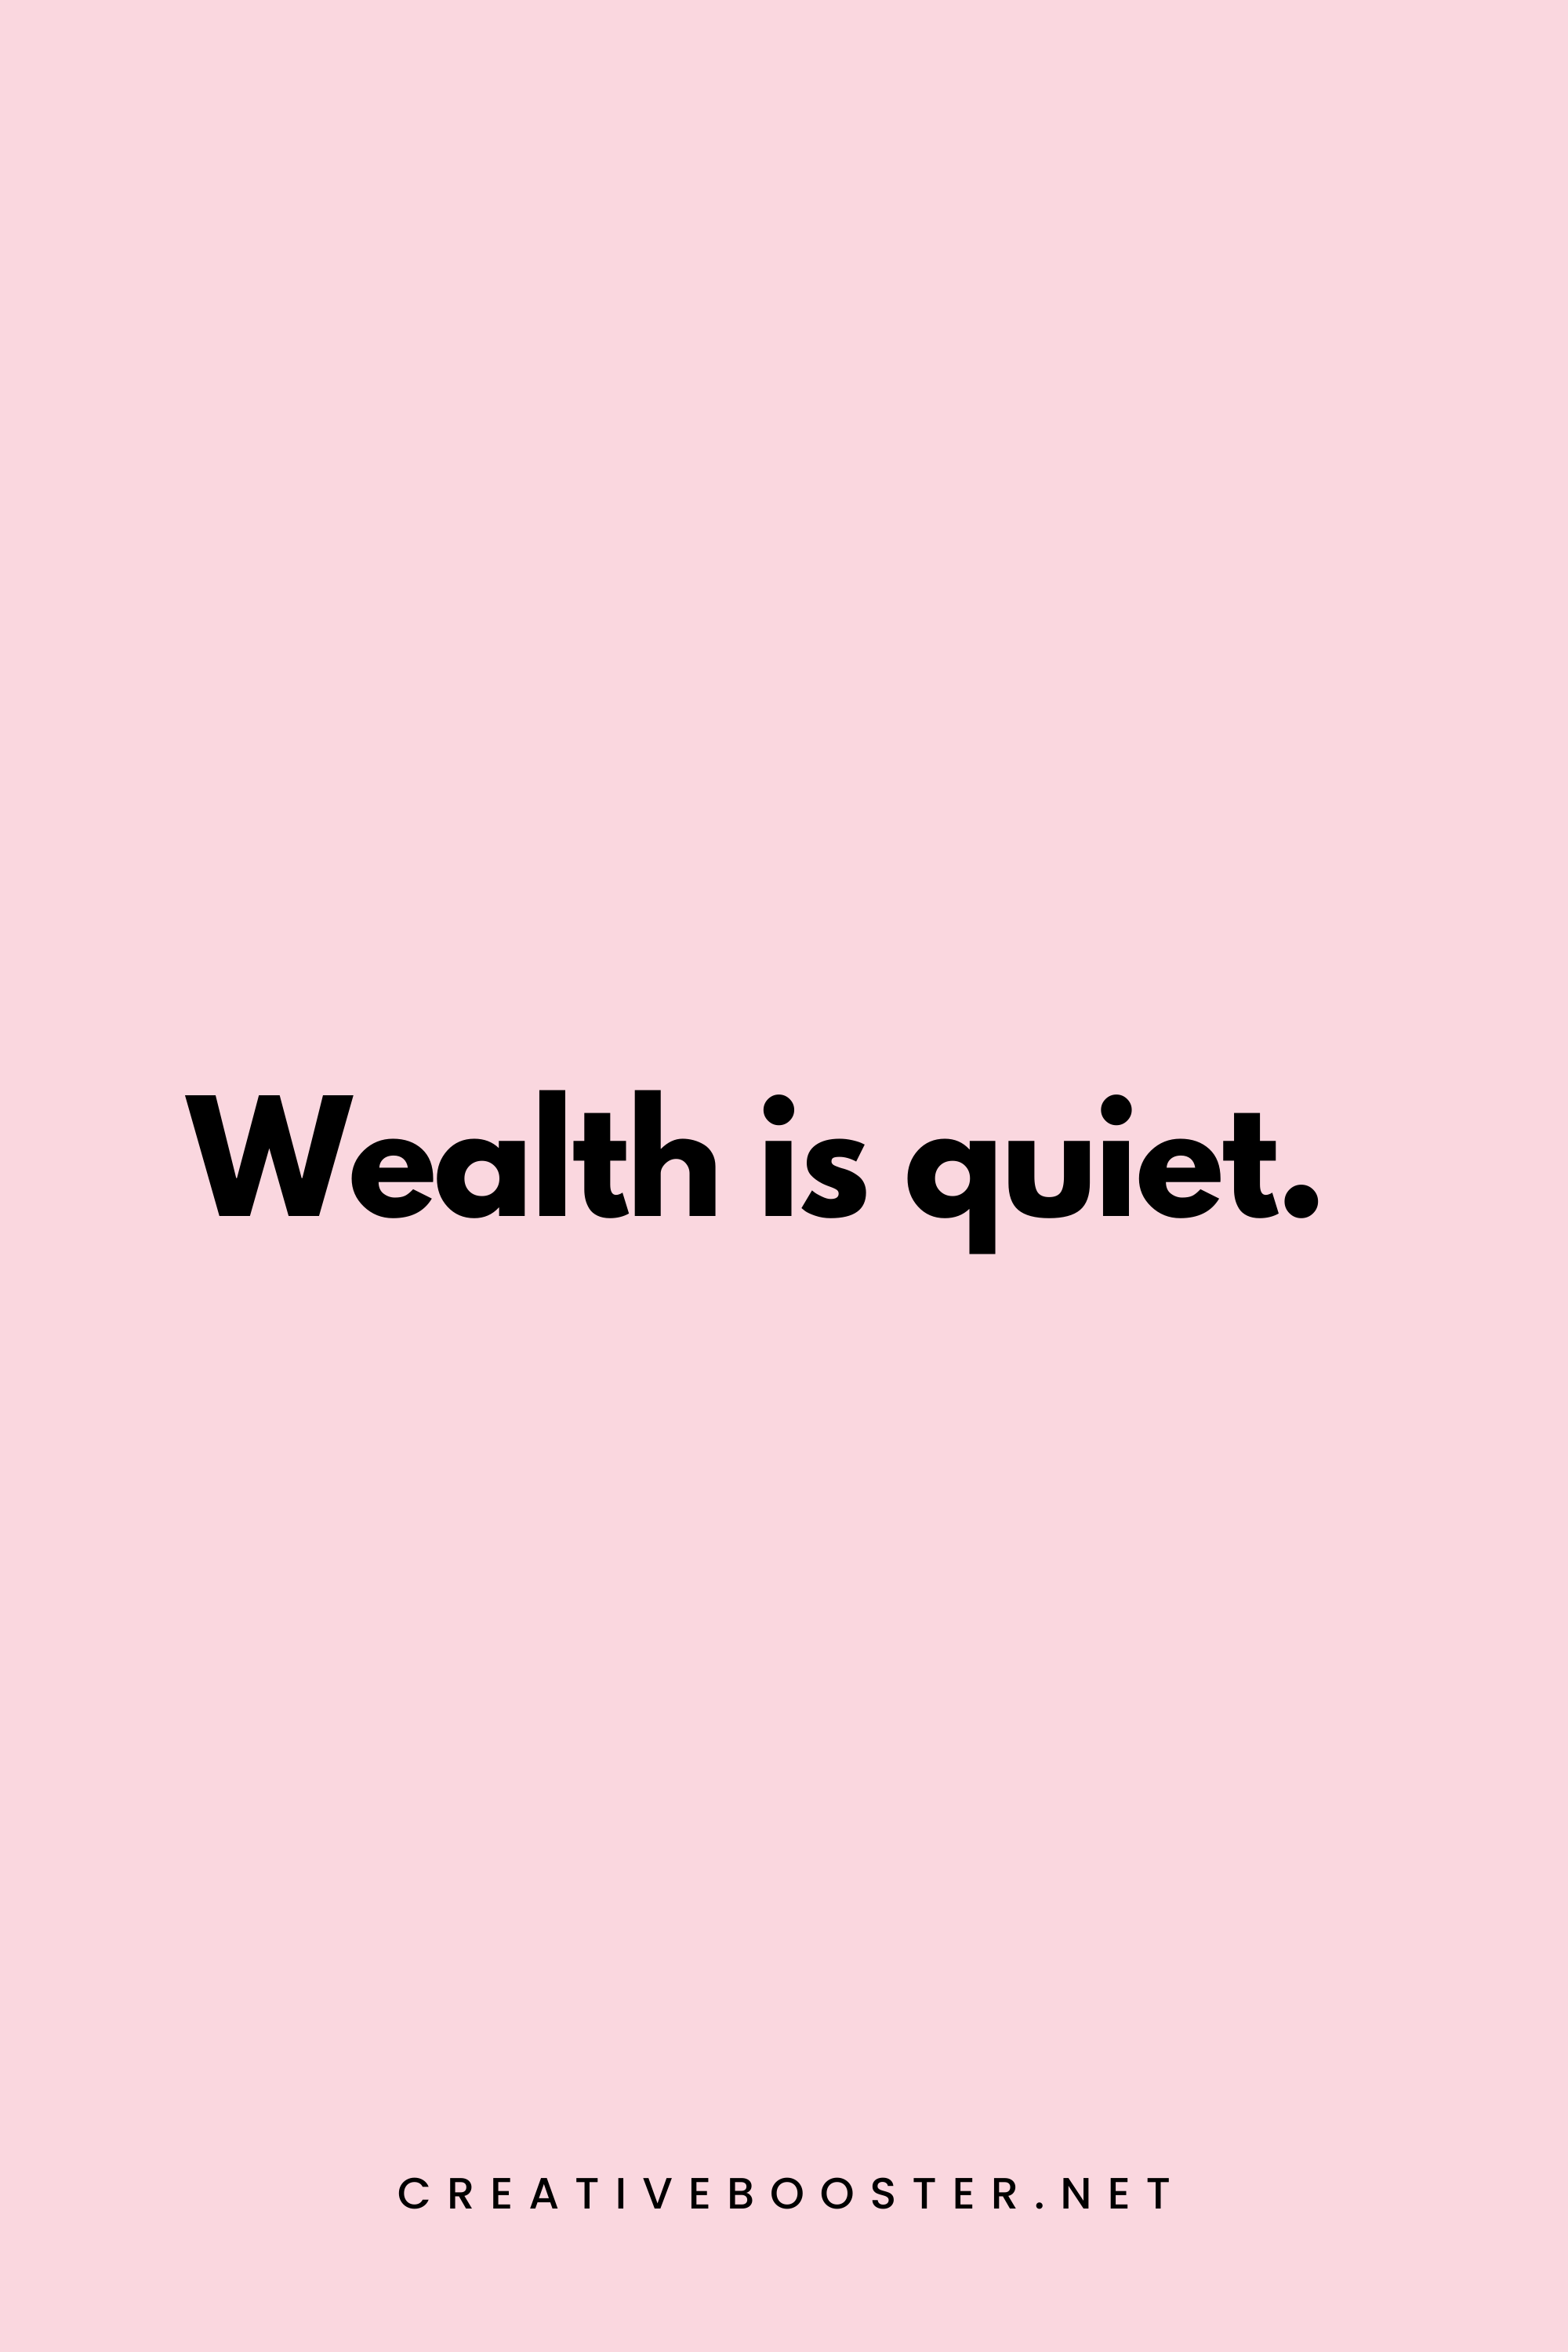 25. Wealth is quiet. - Unknown - 2. Short Financial Freedom Quotes